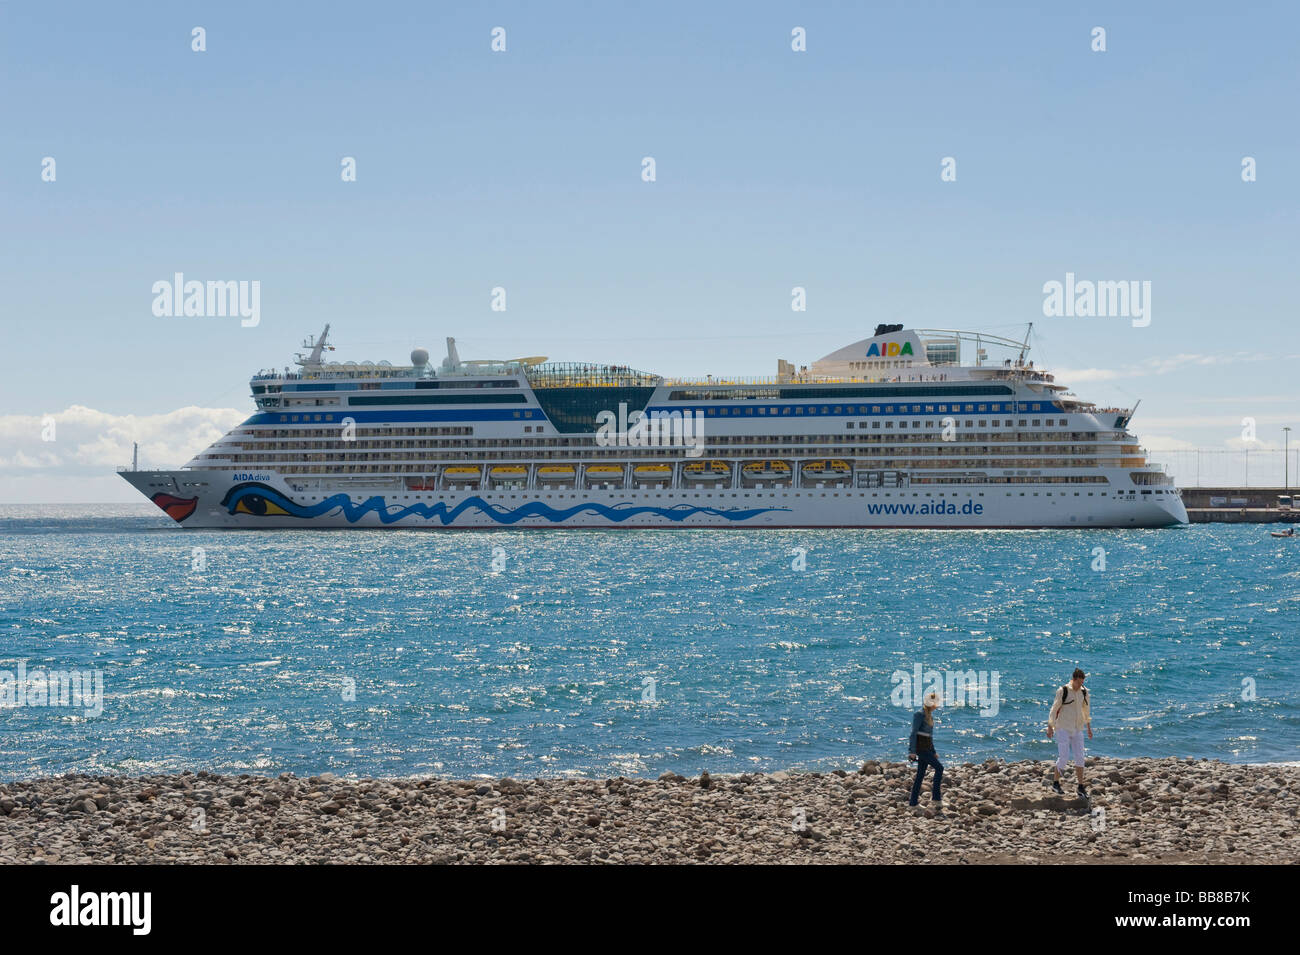 Cruise ship in the port of Funchal, Madeira, Portugal Stock Photo